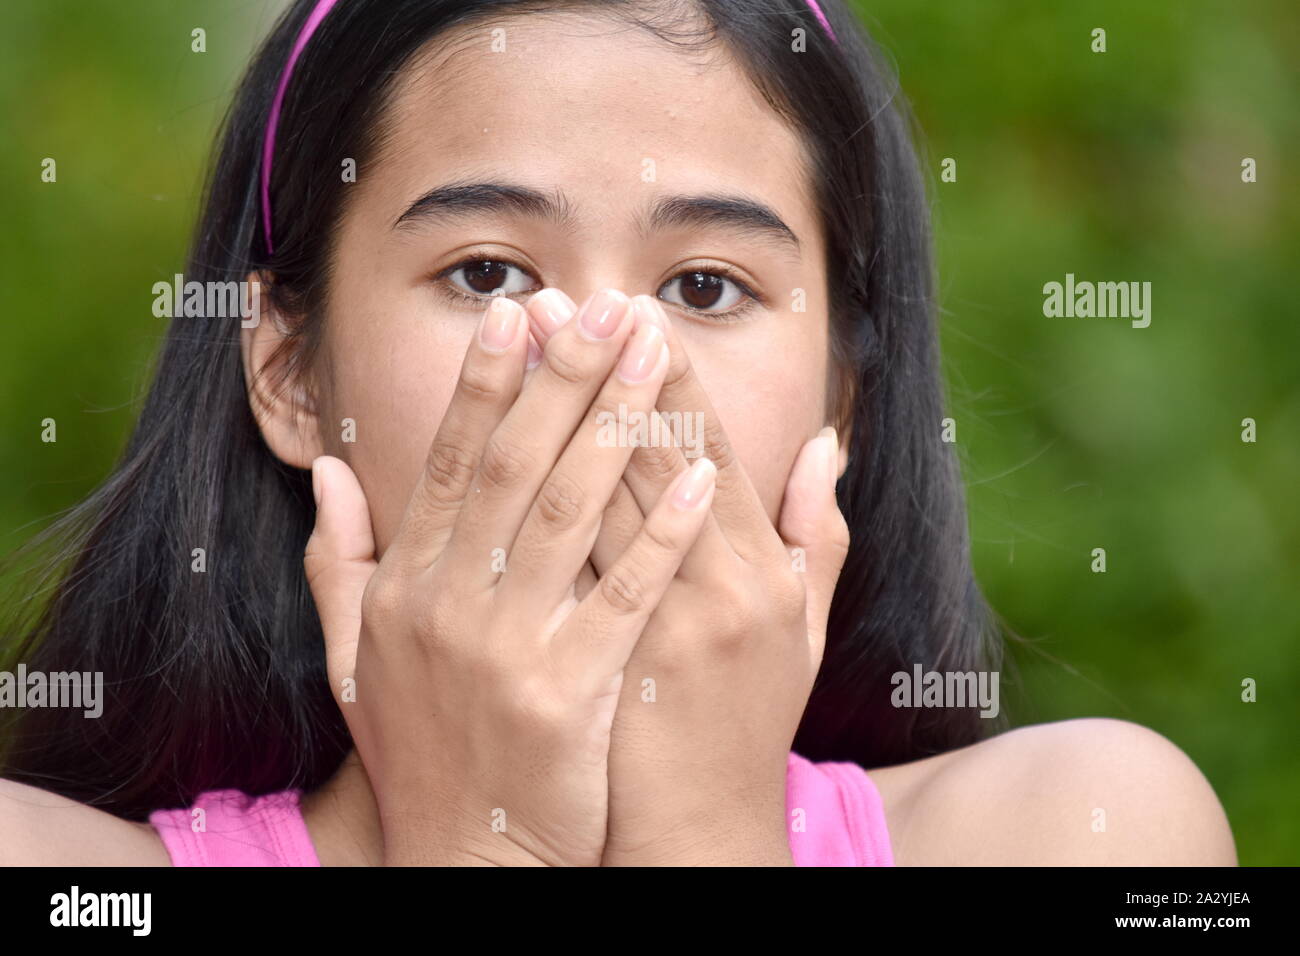 An A Startled Youthful Minority Person Stock Photo